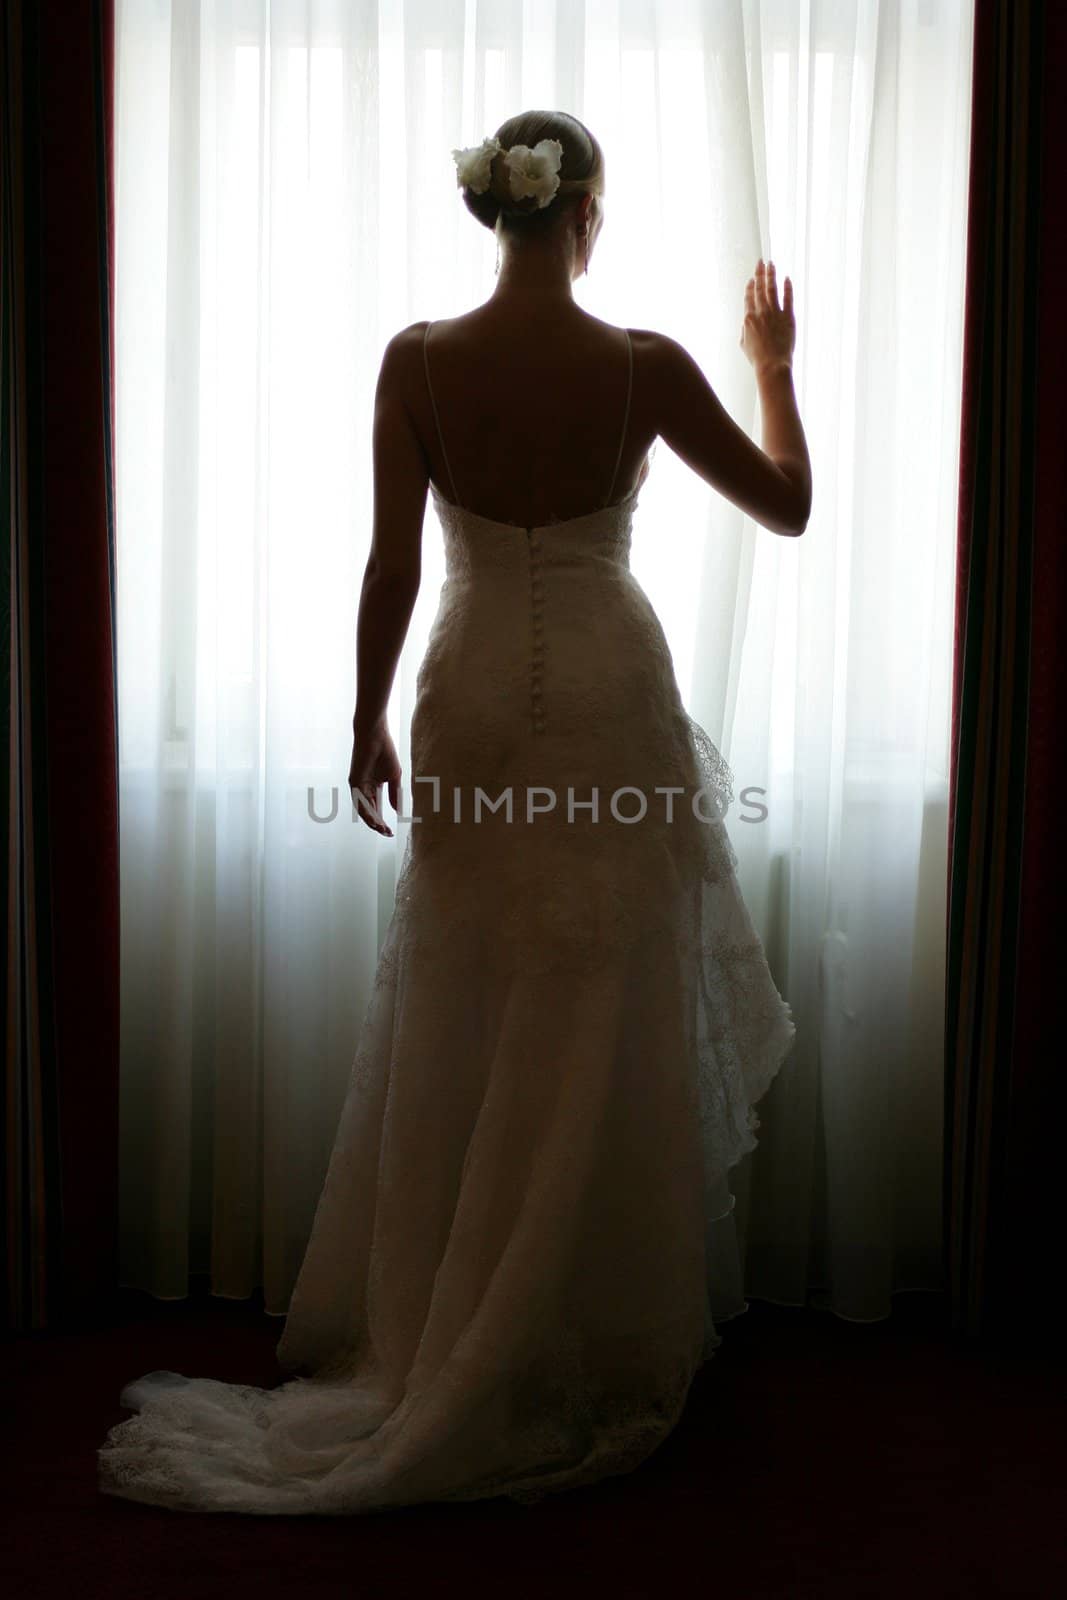 Rear view of young bride in white wedding dress looking out of window.